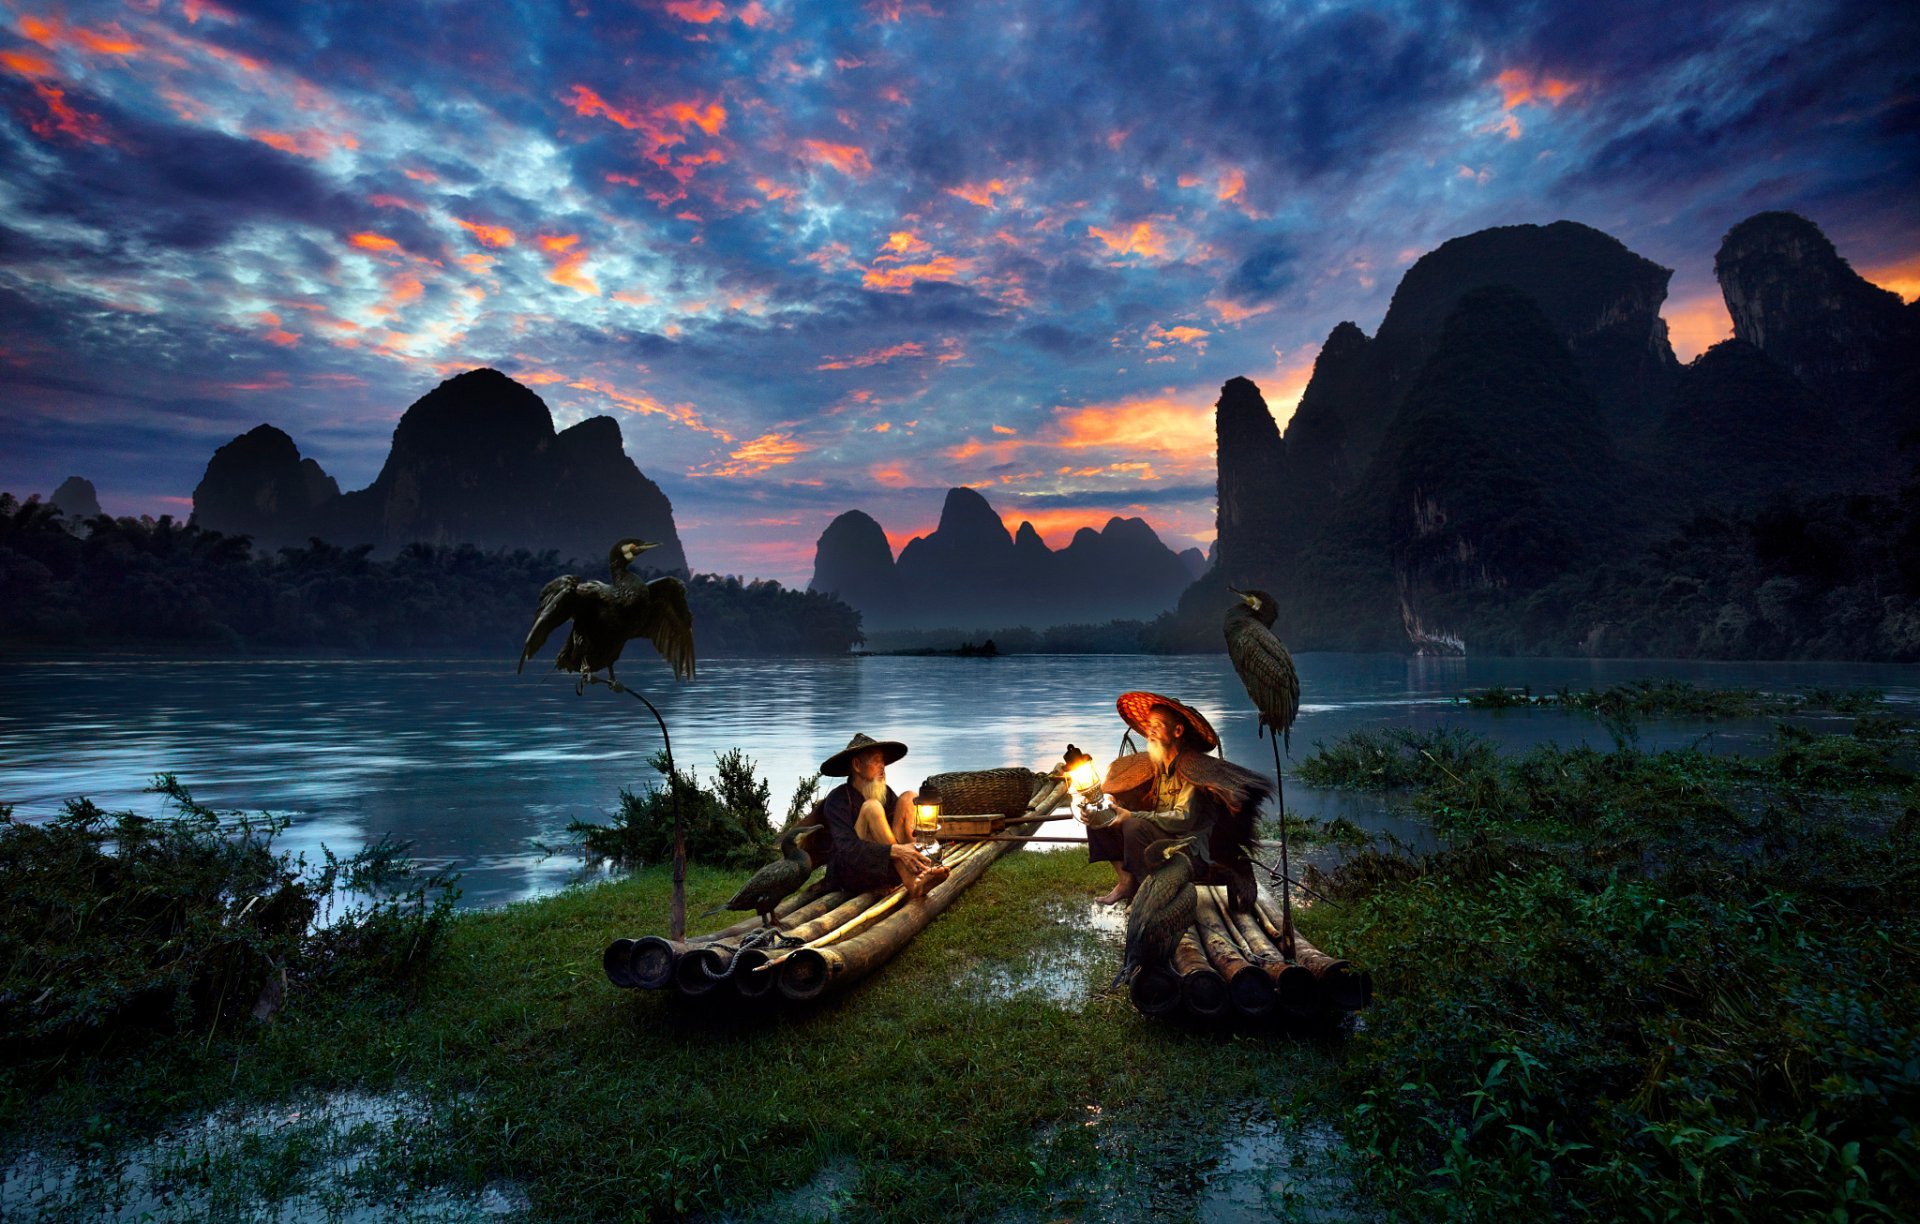 Amazing Guanxi Zhuang Pictures & Backgrounds